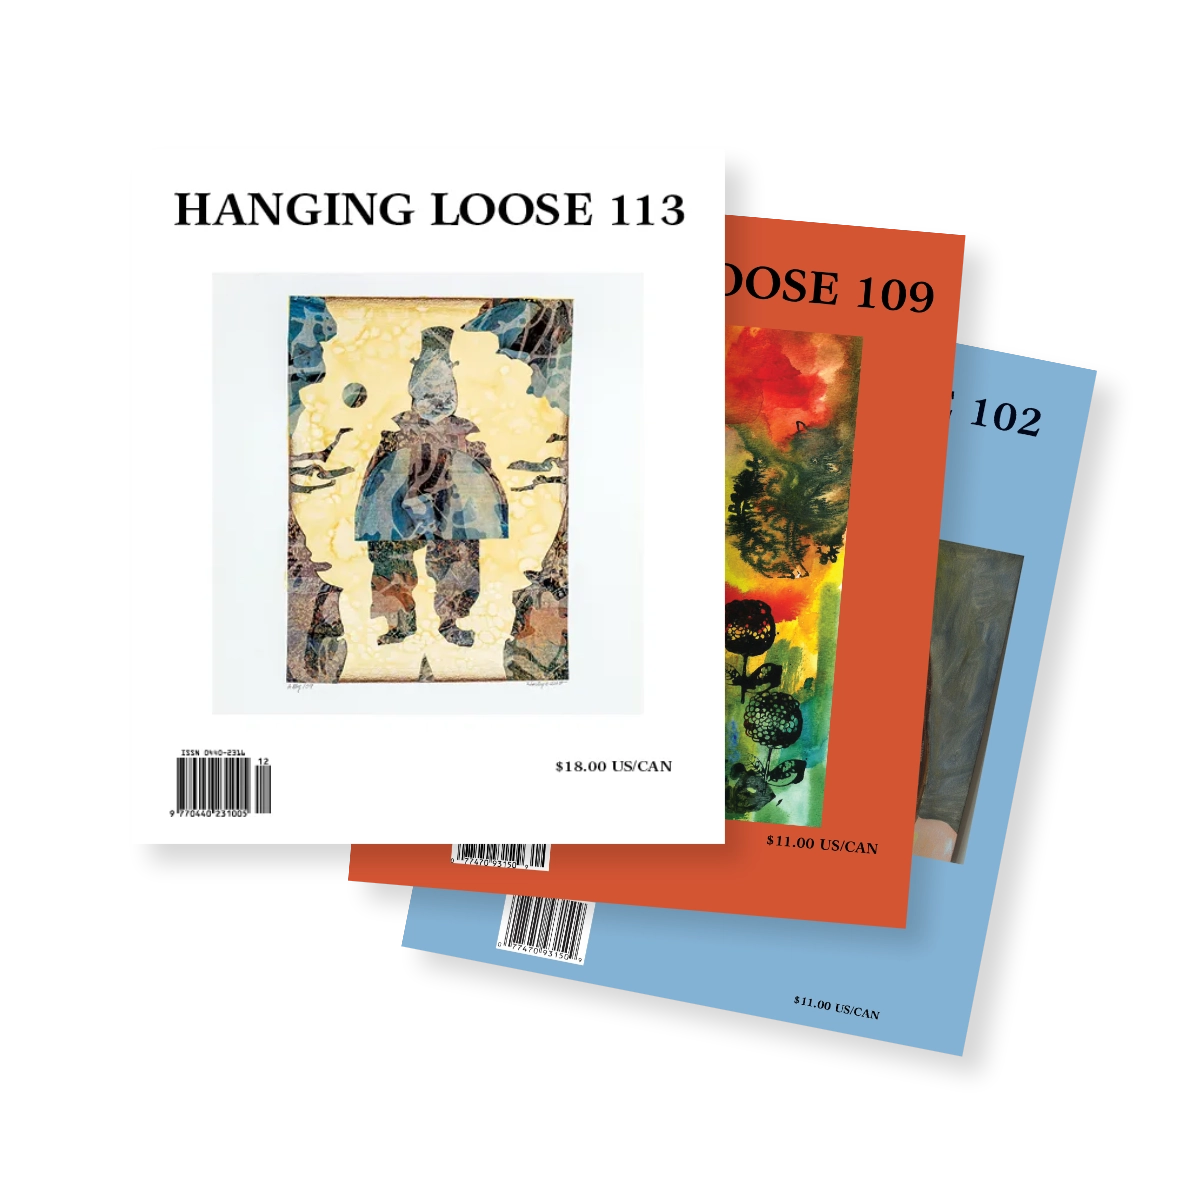 Hanging Loose Press Issues